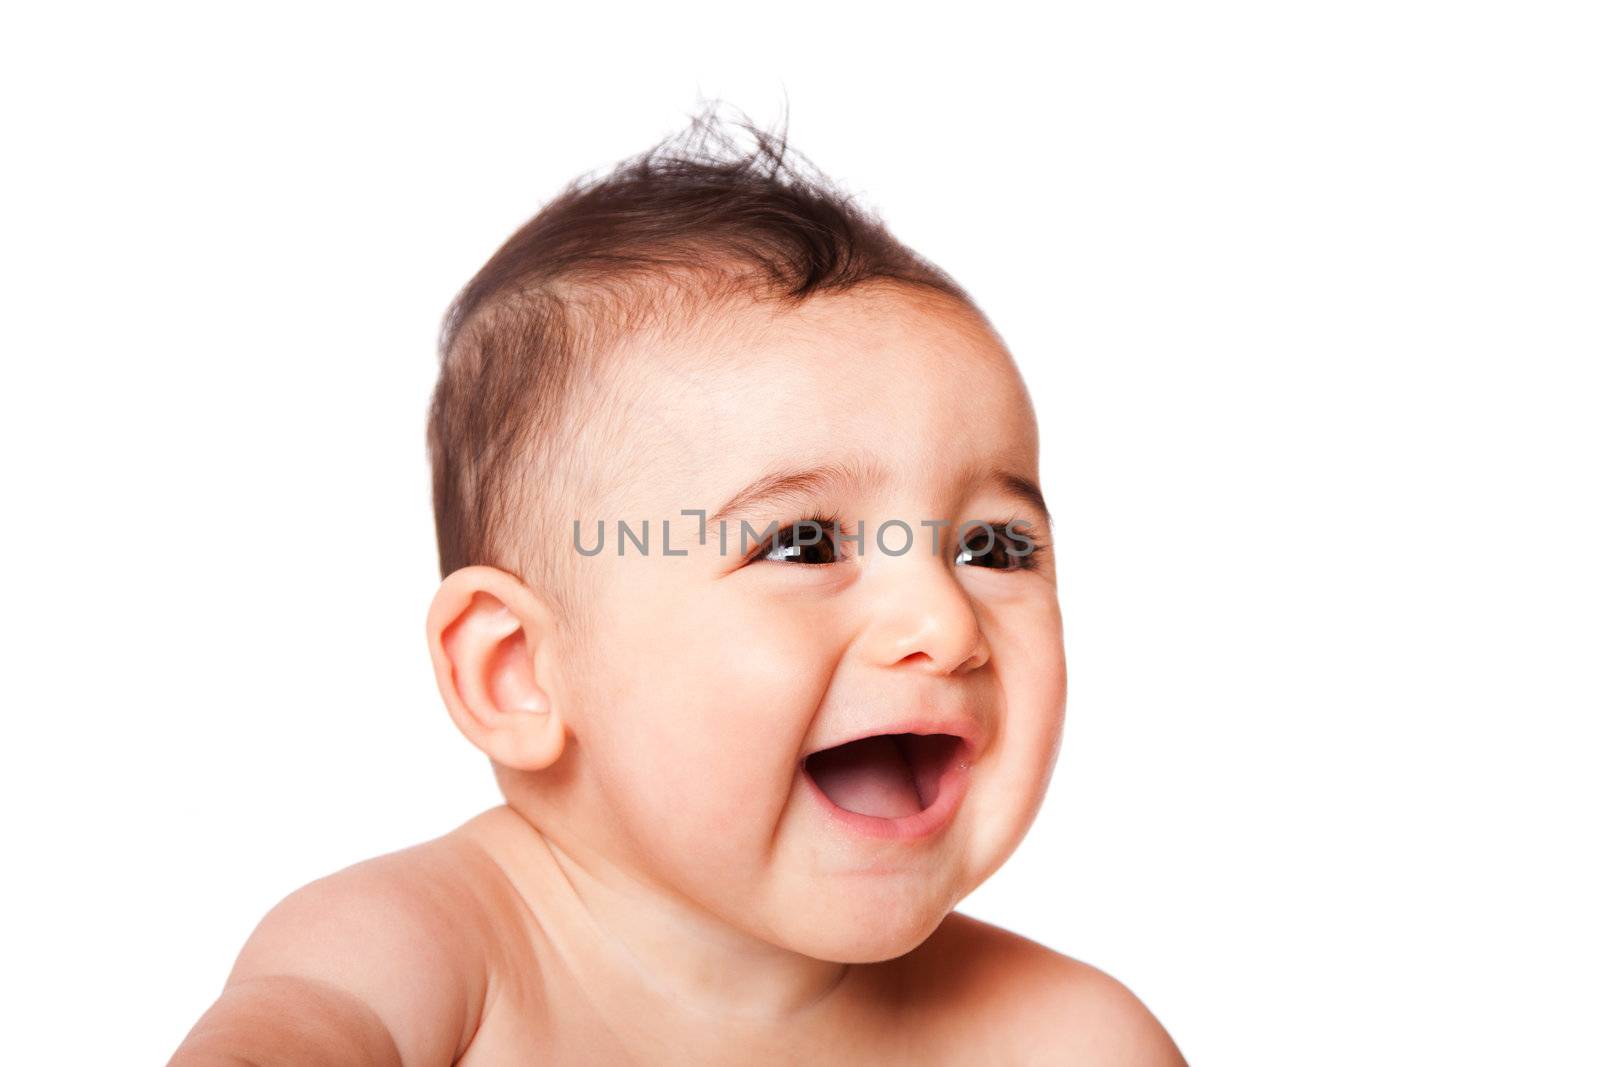 Beautiful expressive adorable happy cute laughing smiling baby infant face from side, isolated.